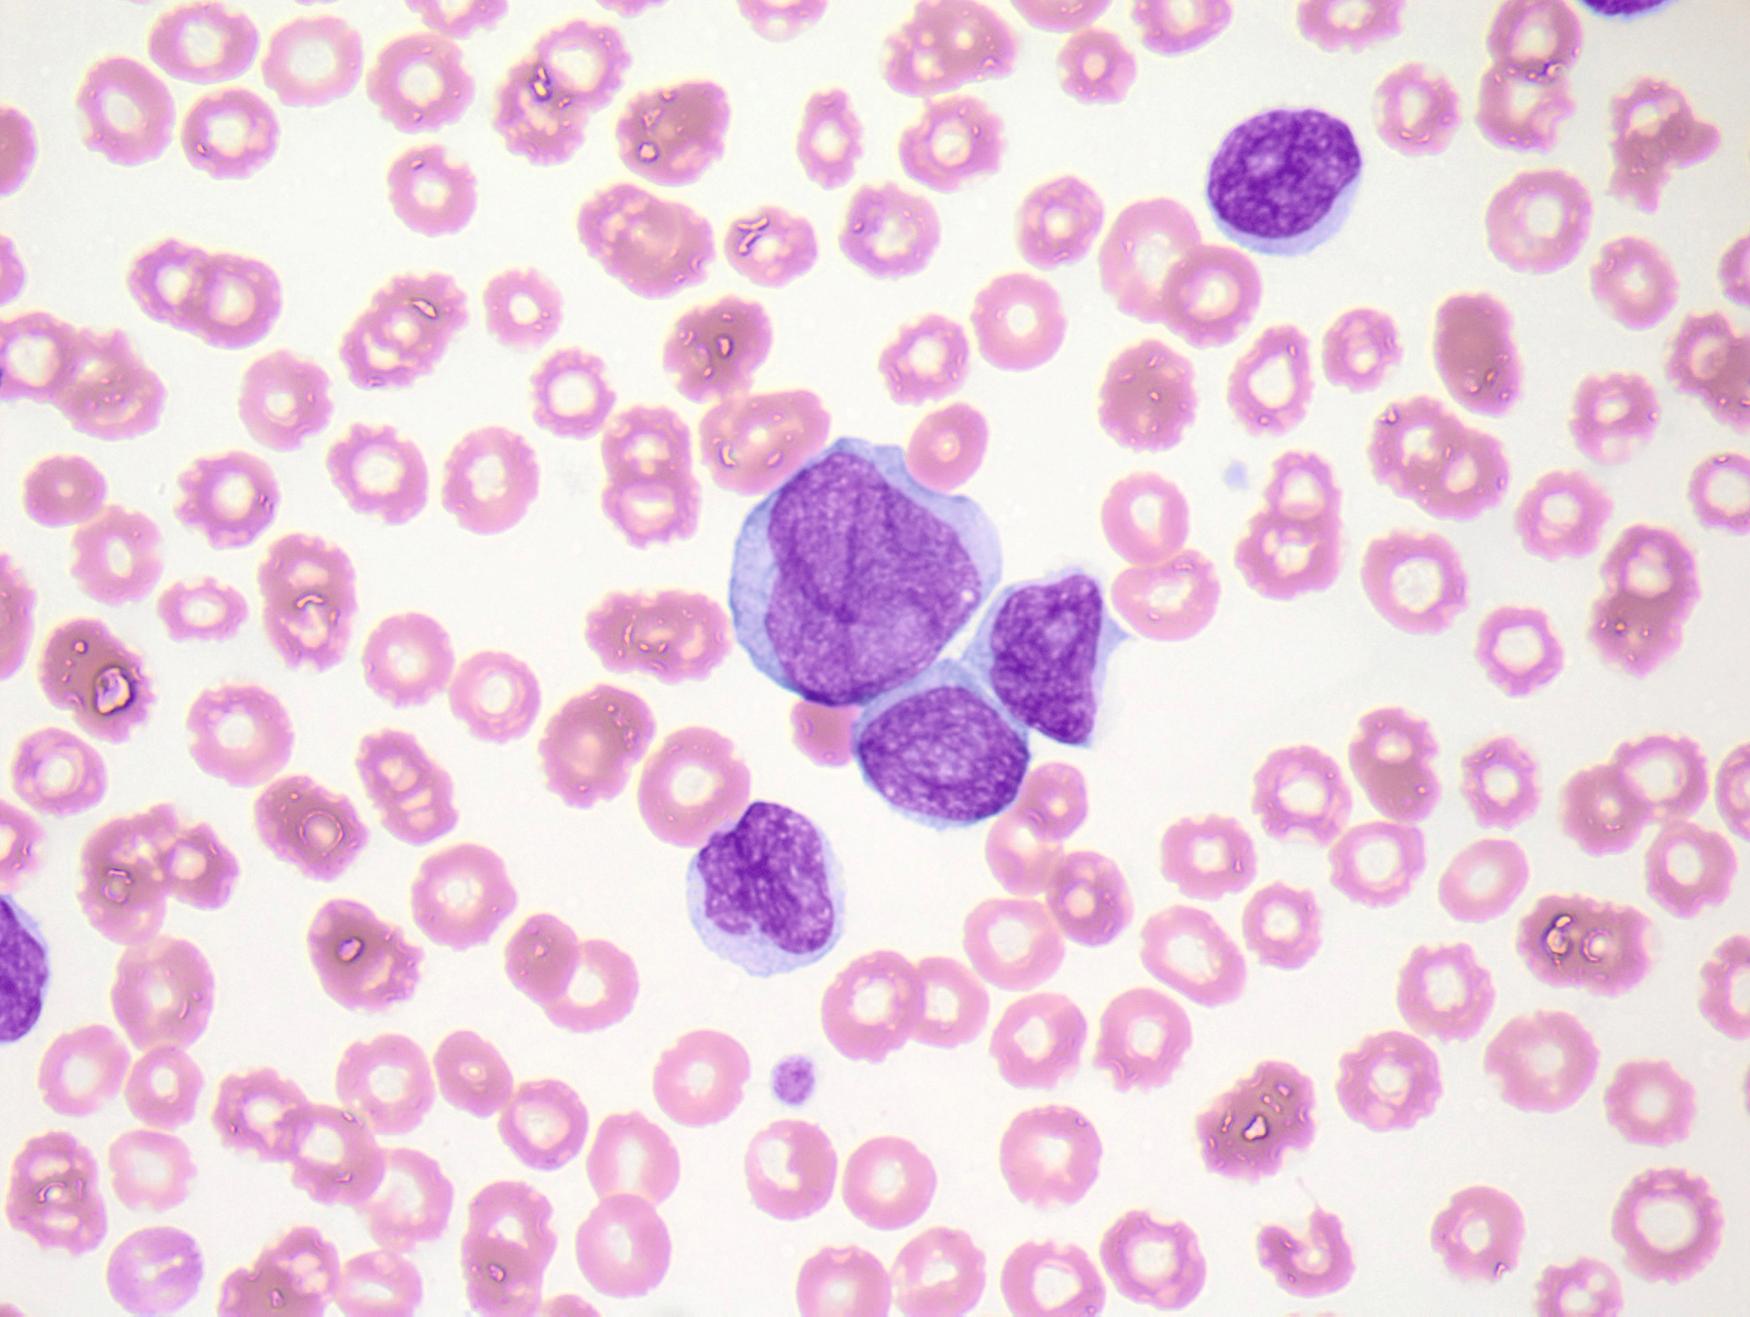 Fig. 10.21, B-cell prolymphocytic leukemia in peripheral blood. The prolymphocytes have finely reticulated, dispersed chromatin, morphologically mimicking myeloid blast cells.